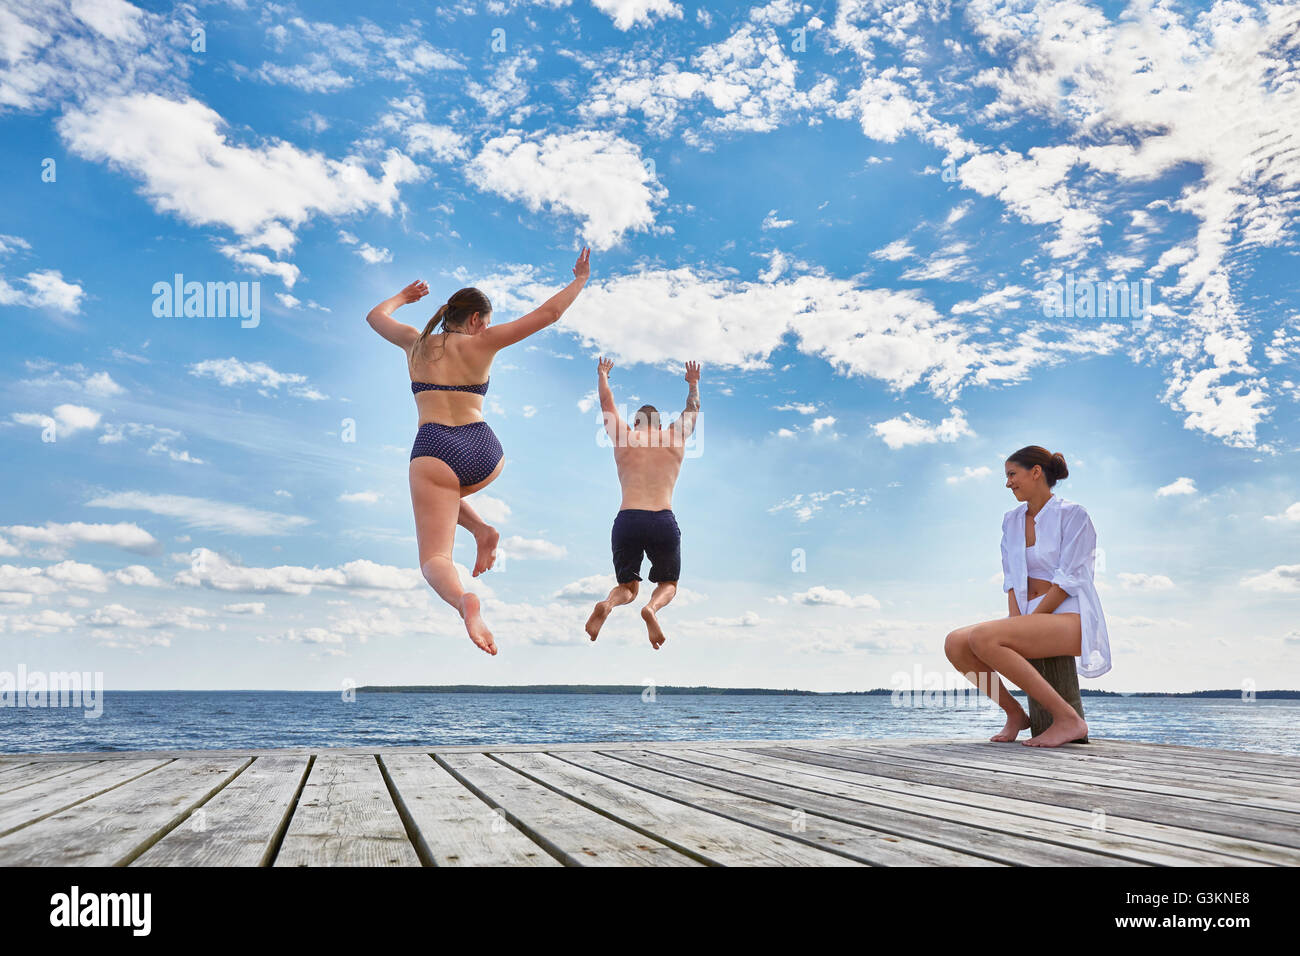 Young woman sitting on post on wooden pier, watching friends jump into sea, rear view Stock Photo